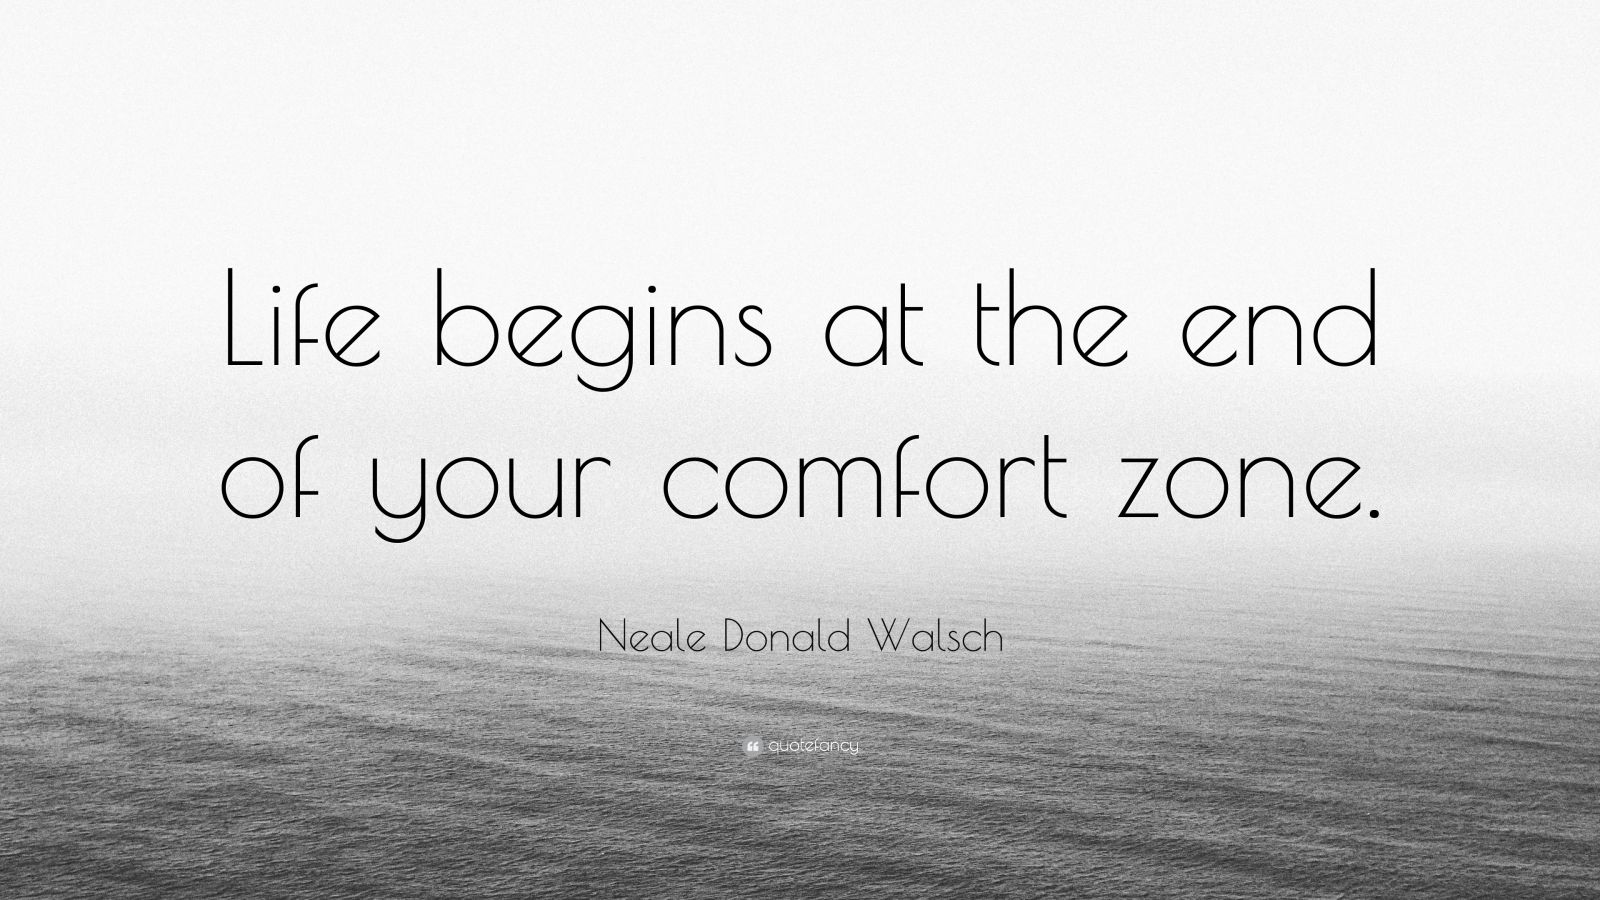 Neale Donald Walsch Quote: “Life begins at the end of your comfort zone